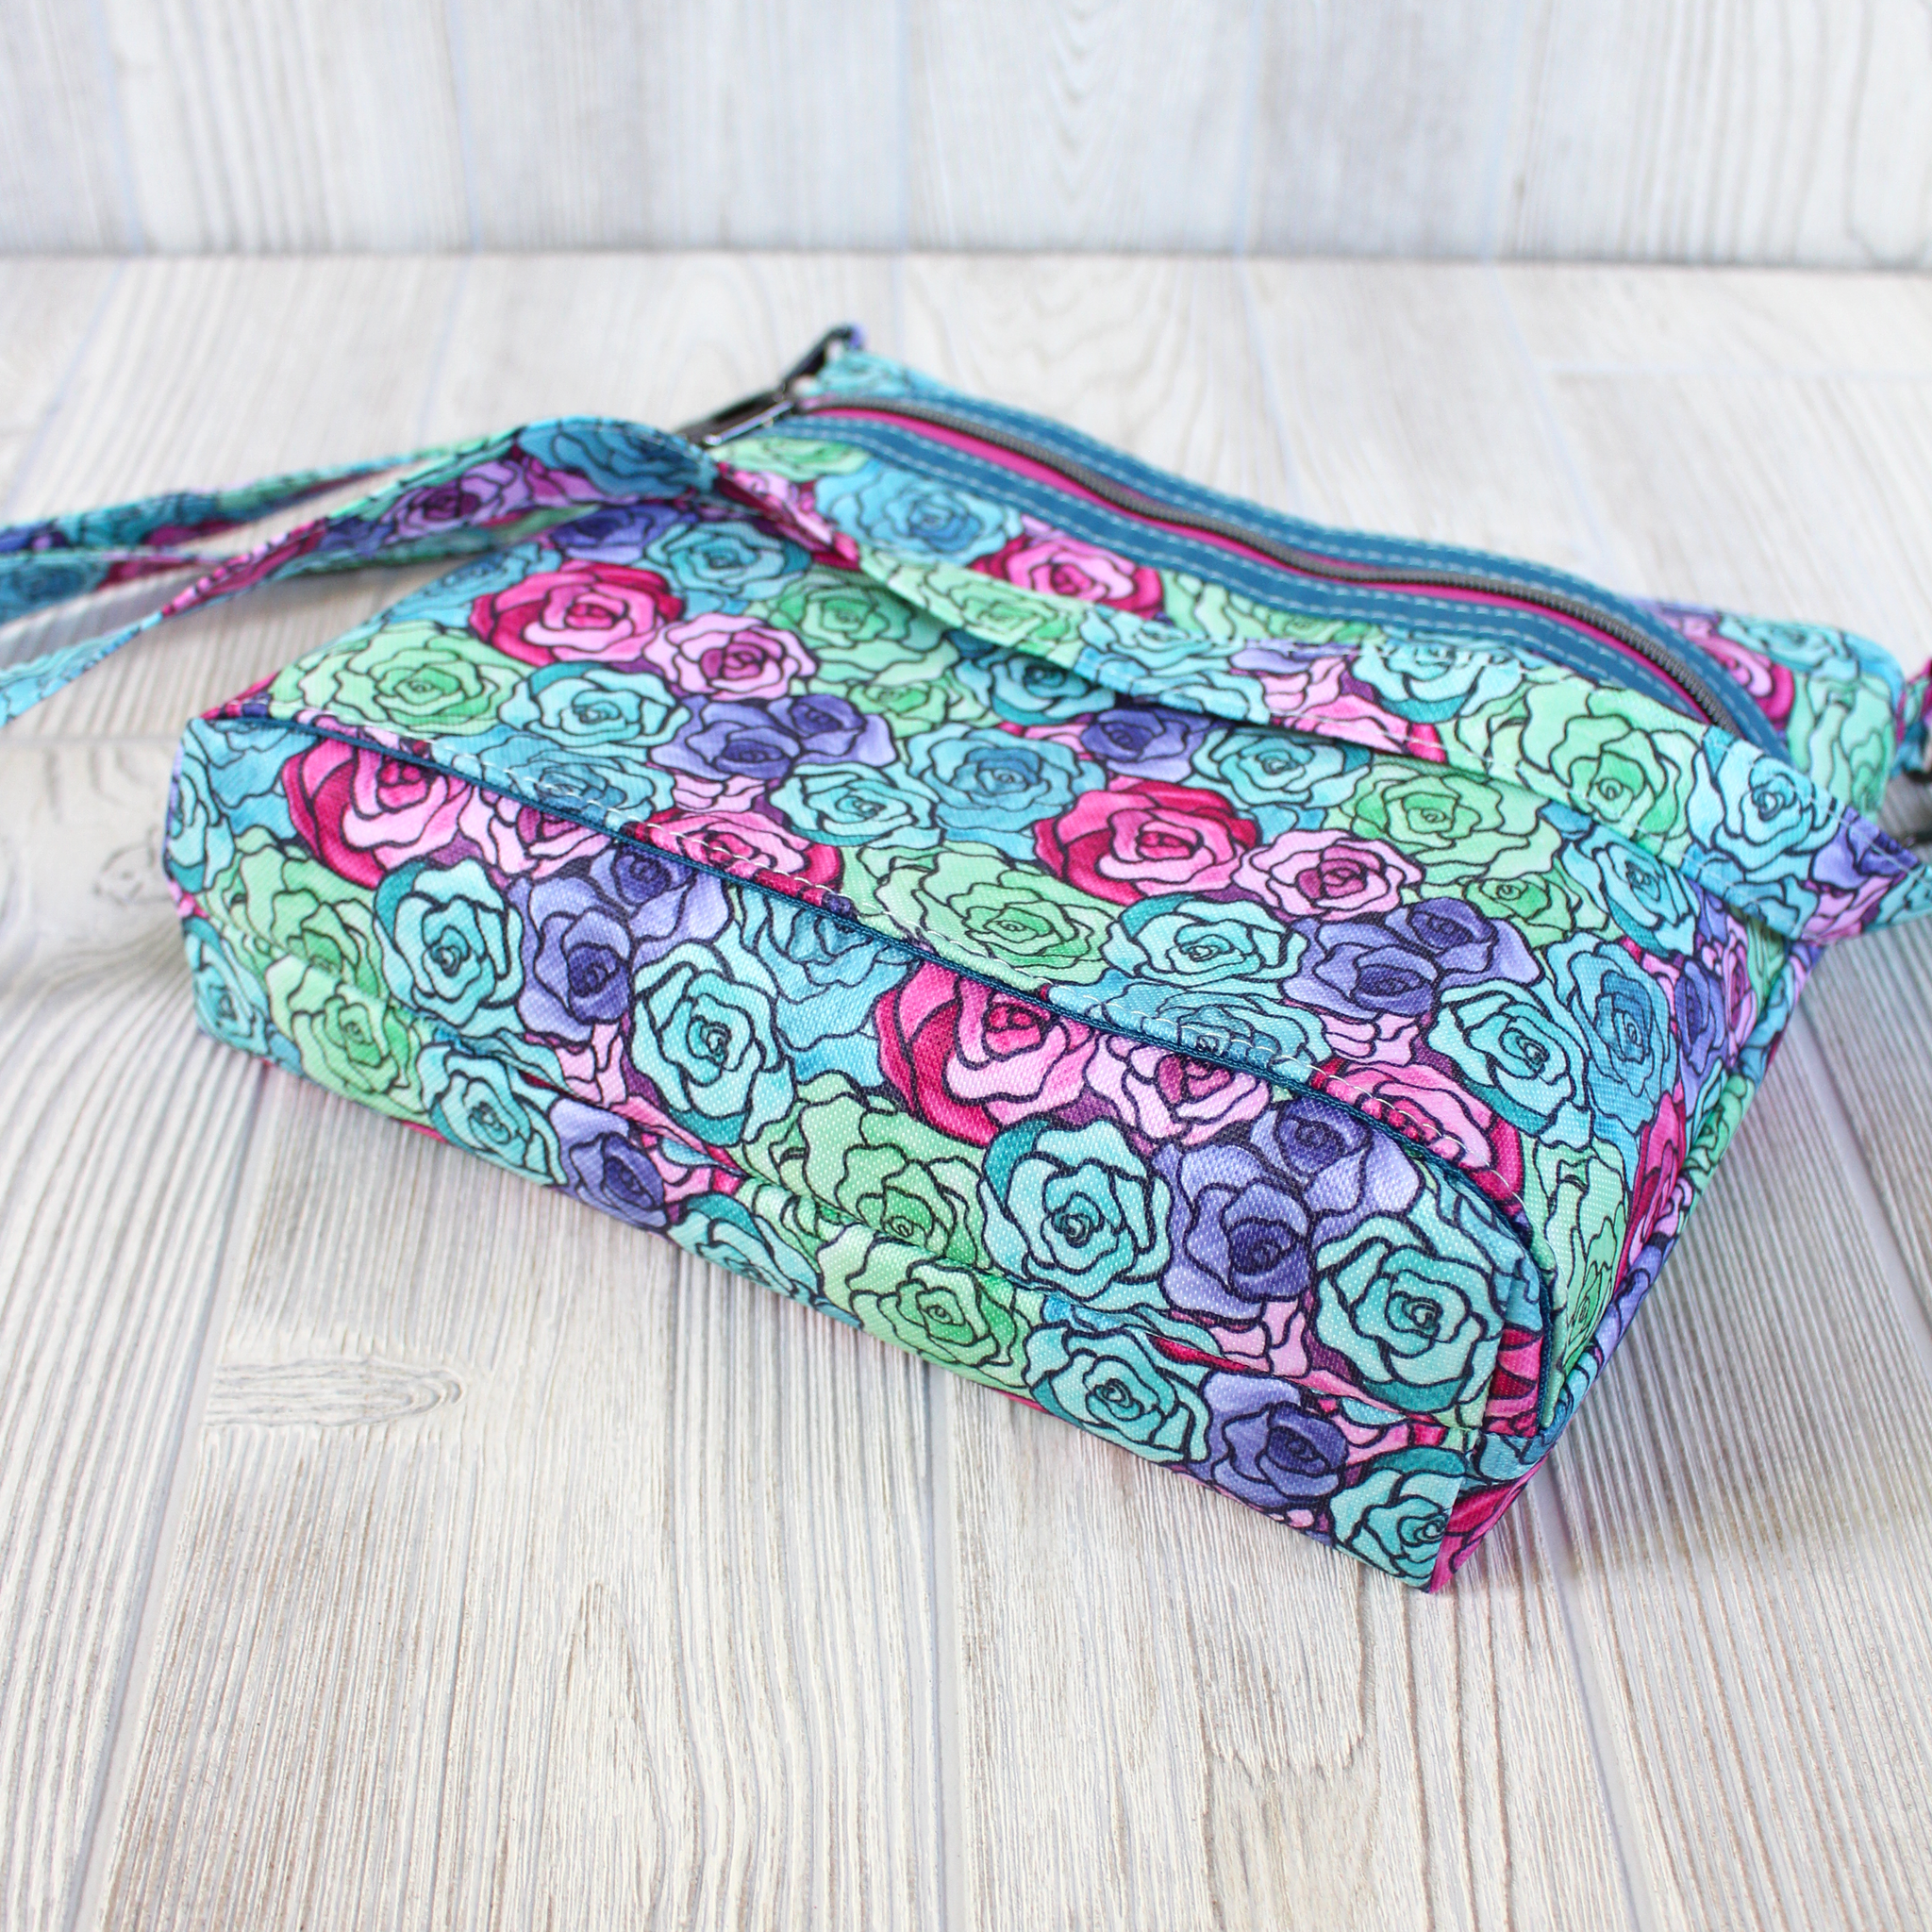 Sewing pattern cross body bag - pdf - instant download - for beginners